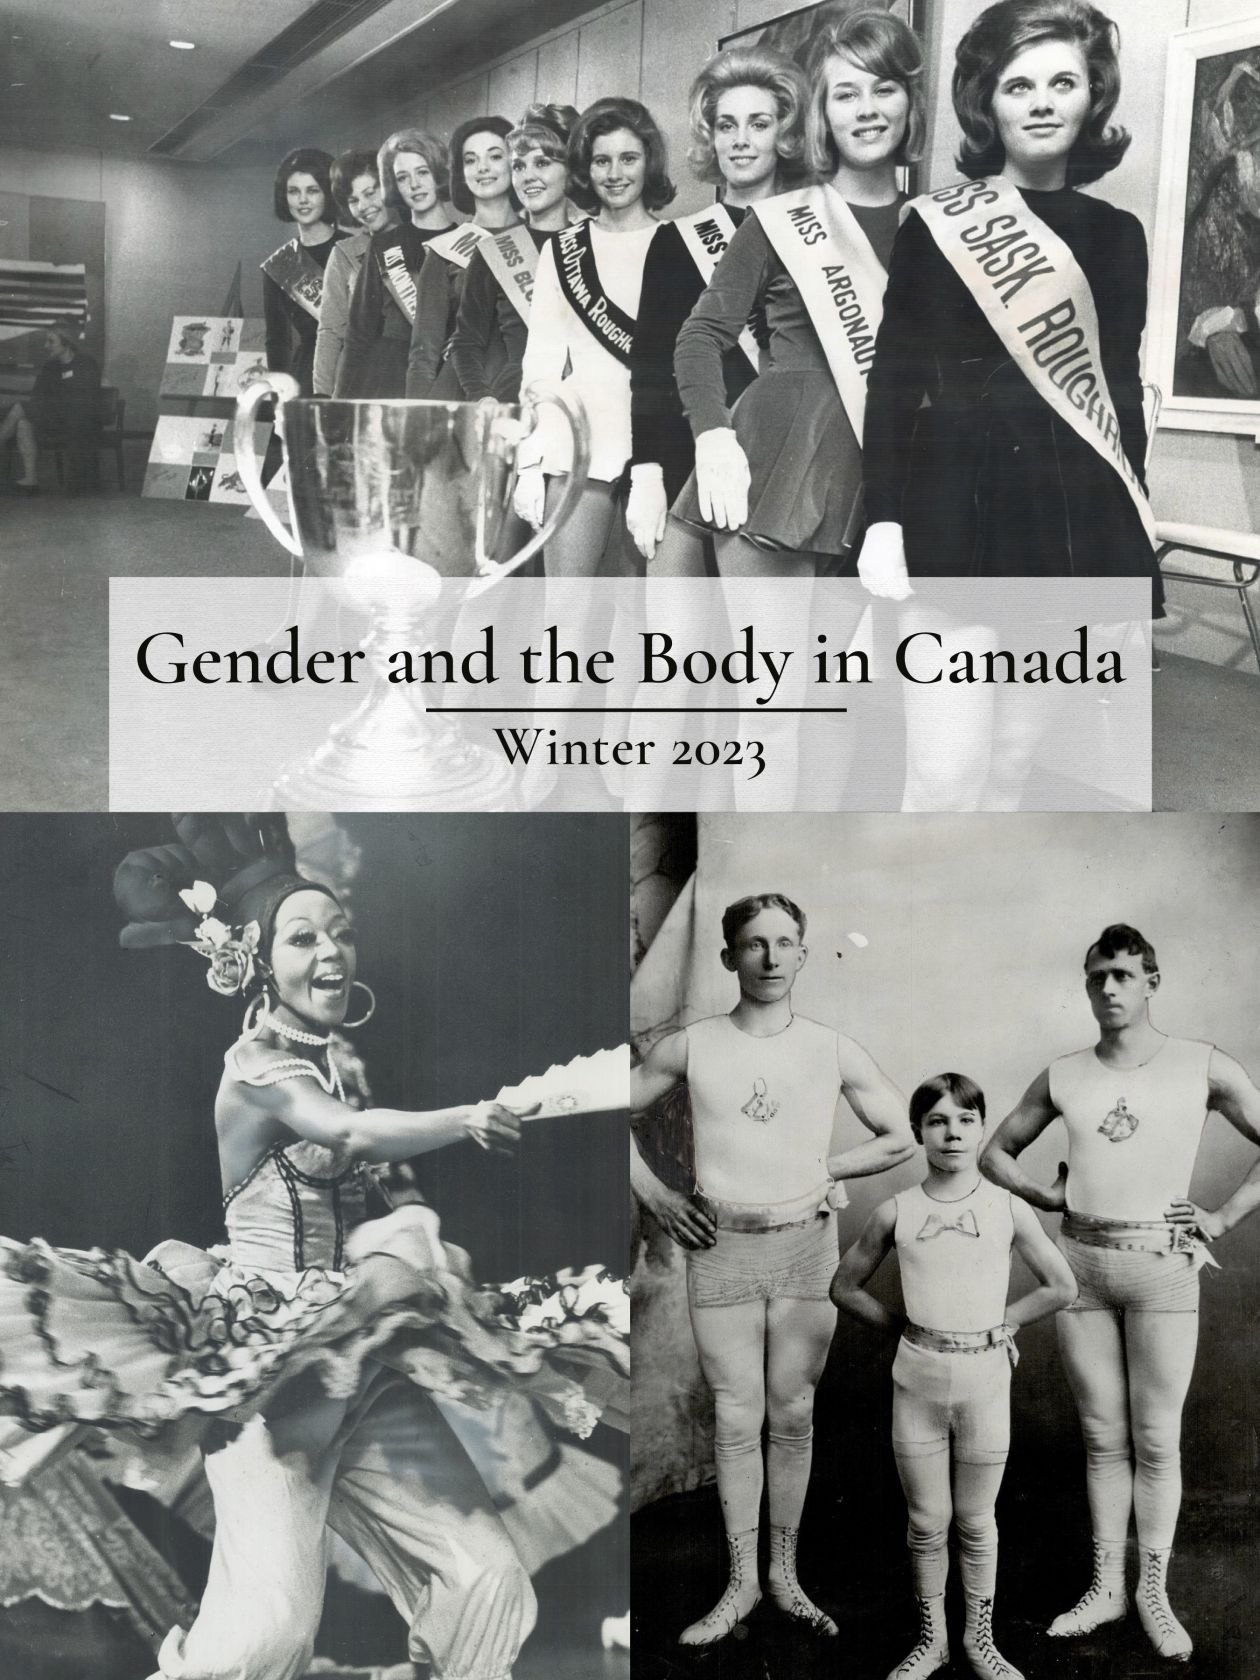 Black and white photographs including: male dancers and a female beauty pageant with the front woman wearing a sash that reads "Miss Sask. Roughriders"